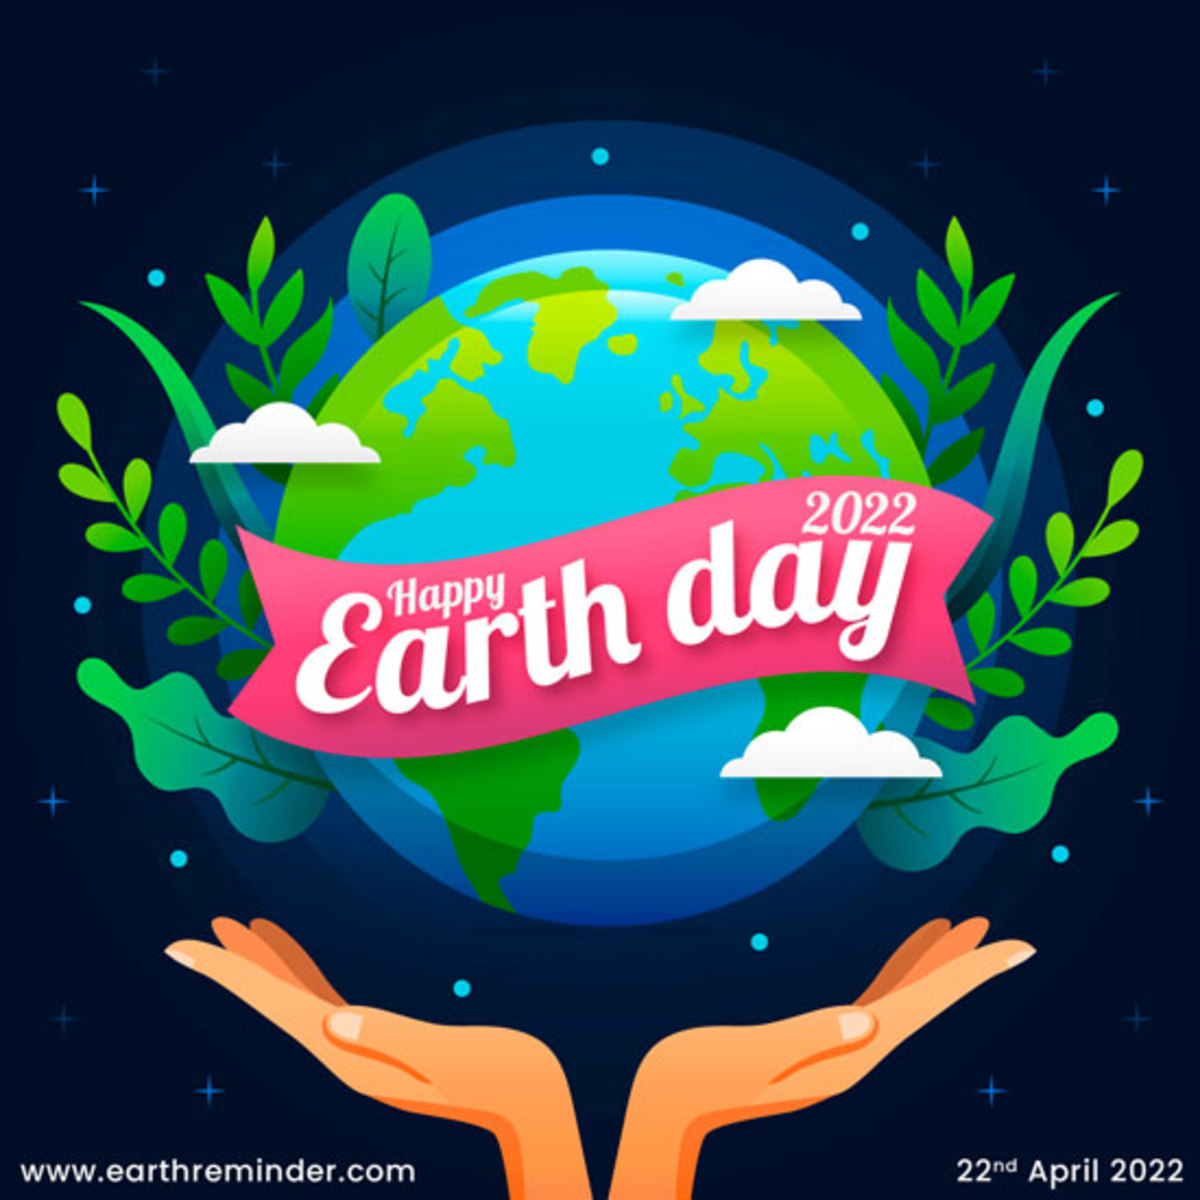 Earth Day April 22, 2022